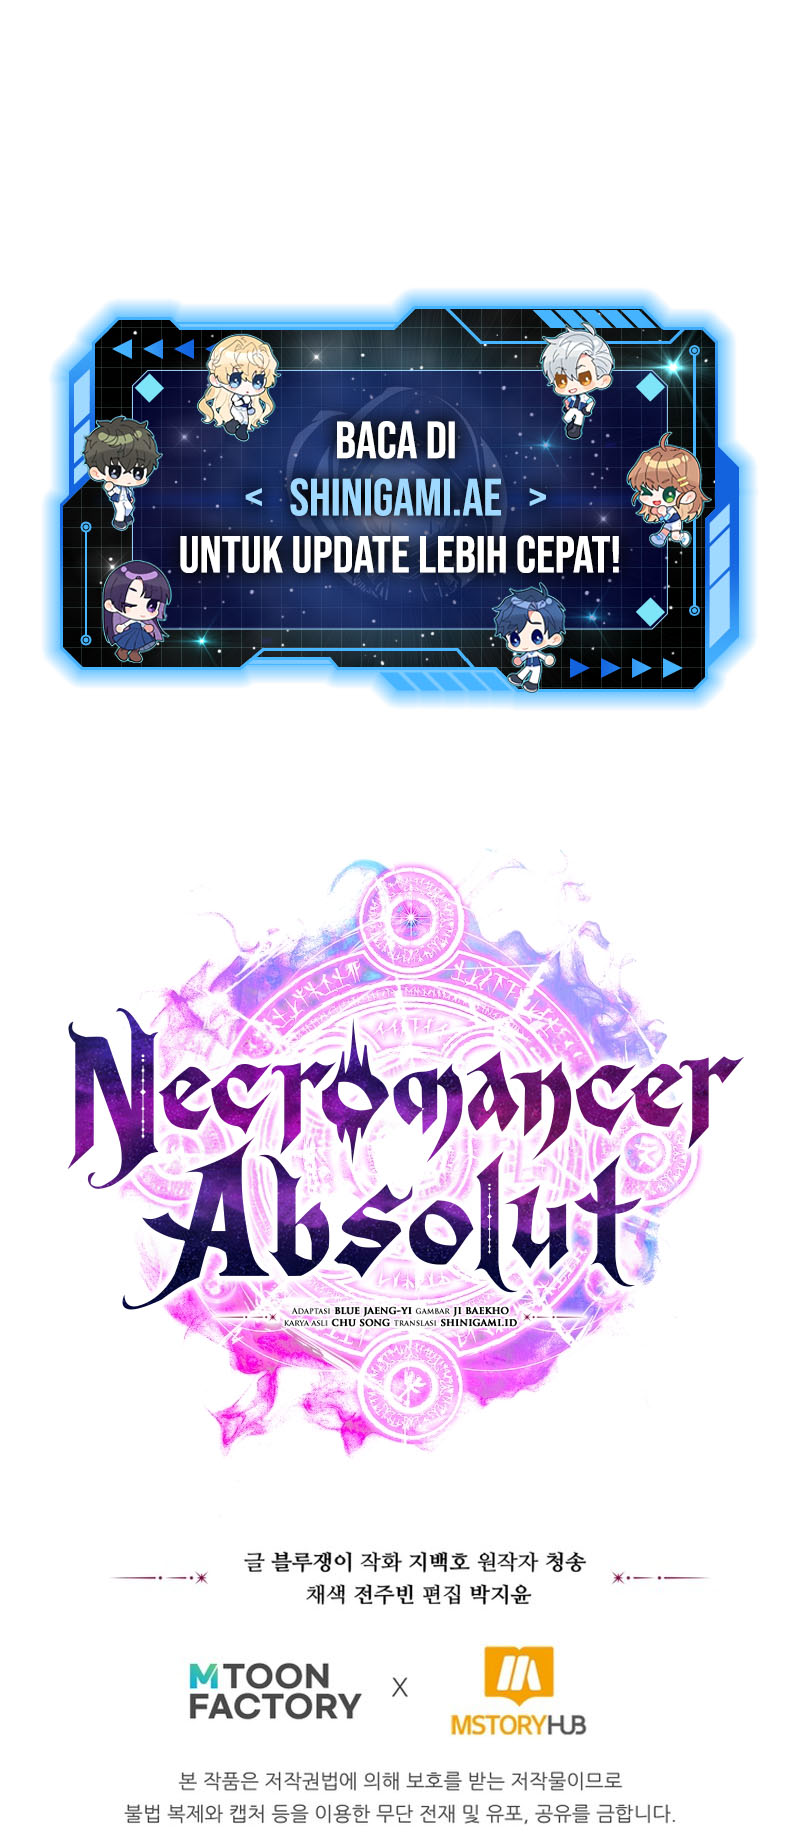 absolute-necromancer Chapter 34